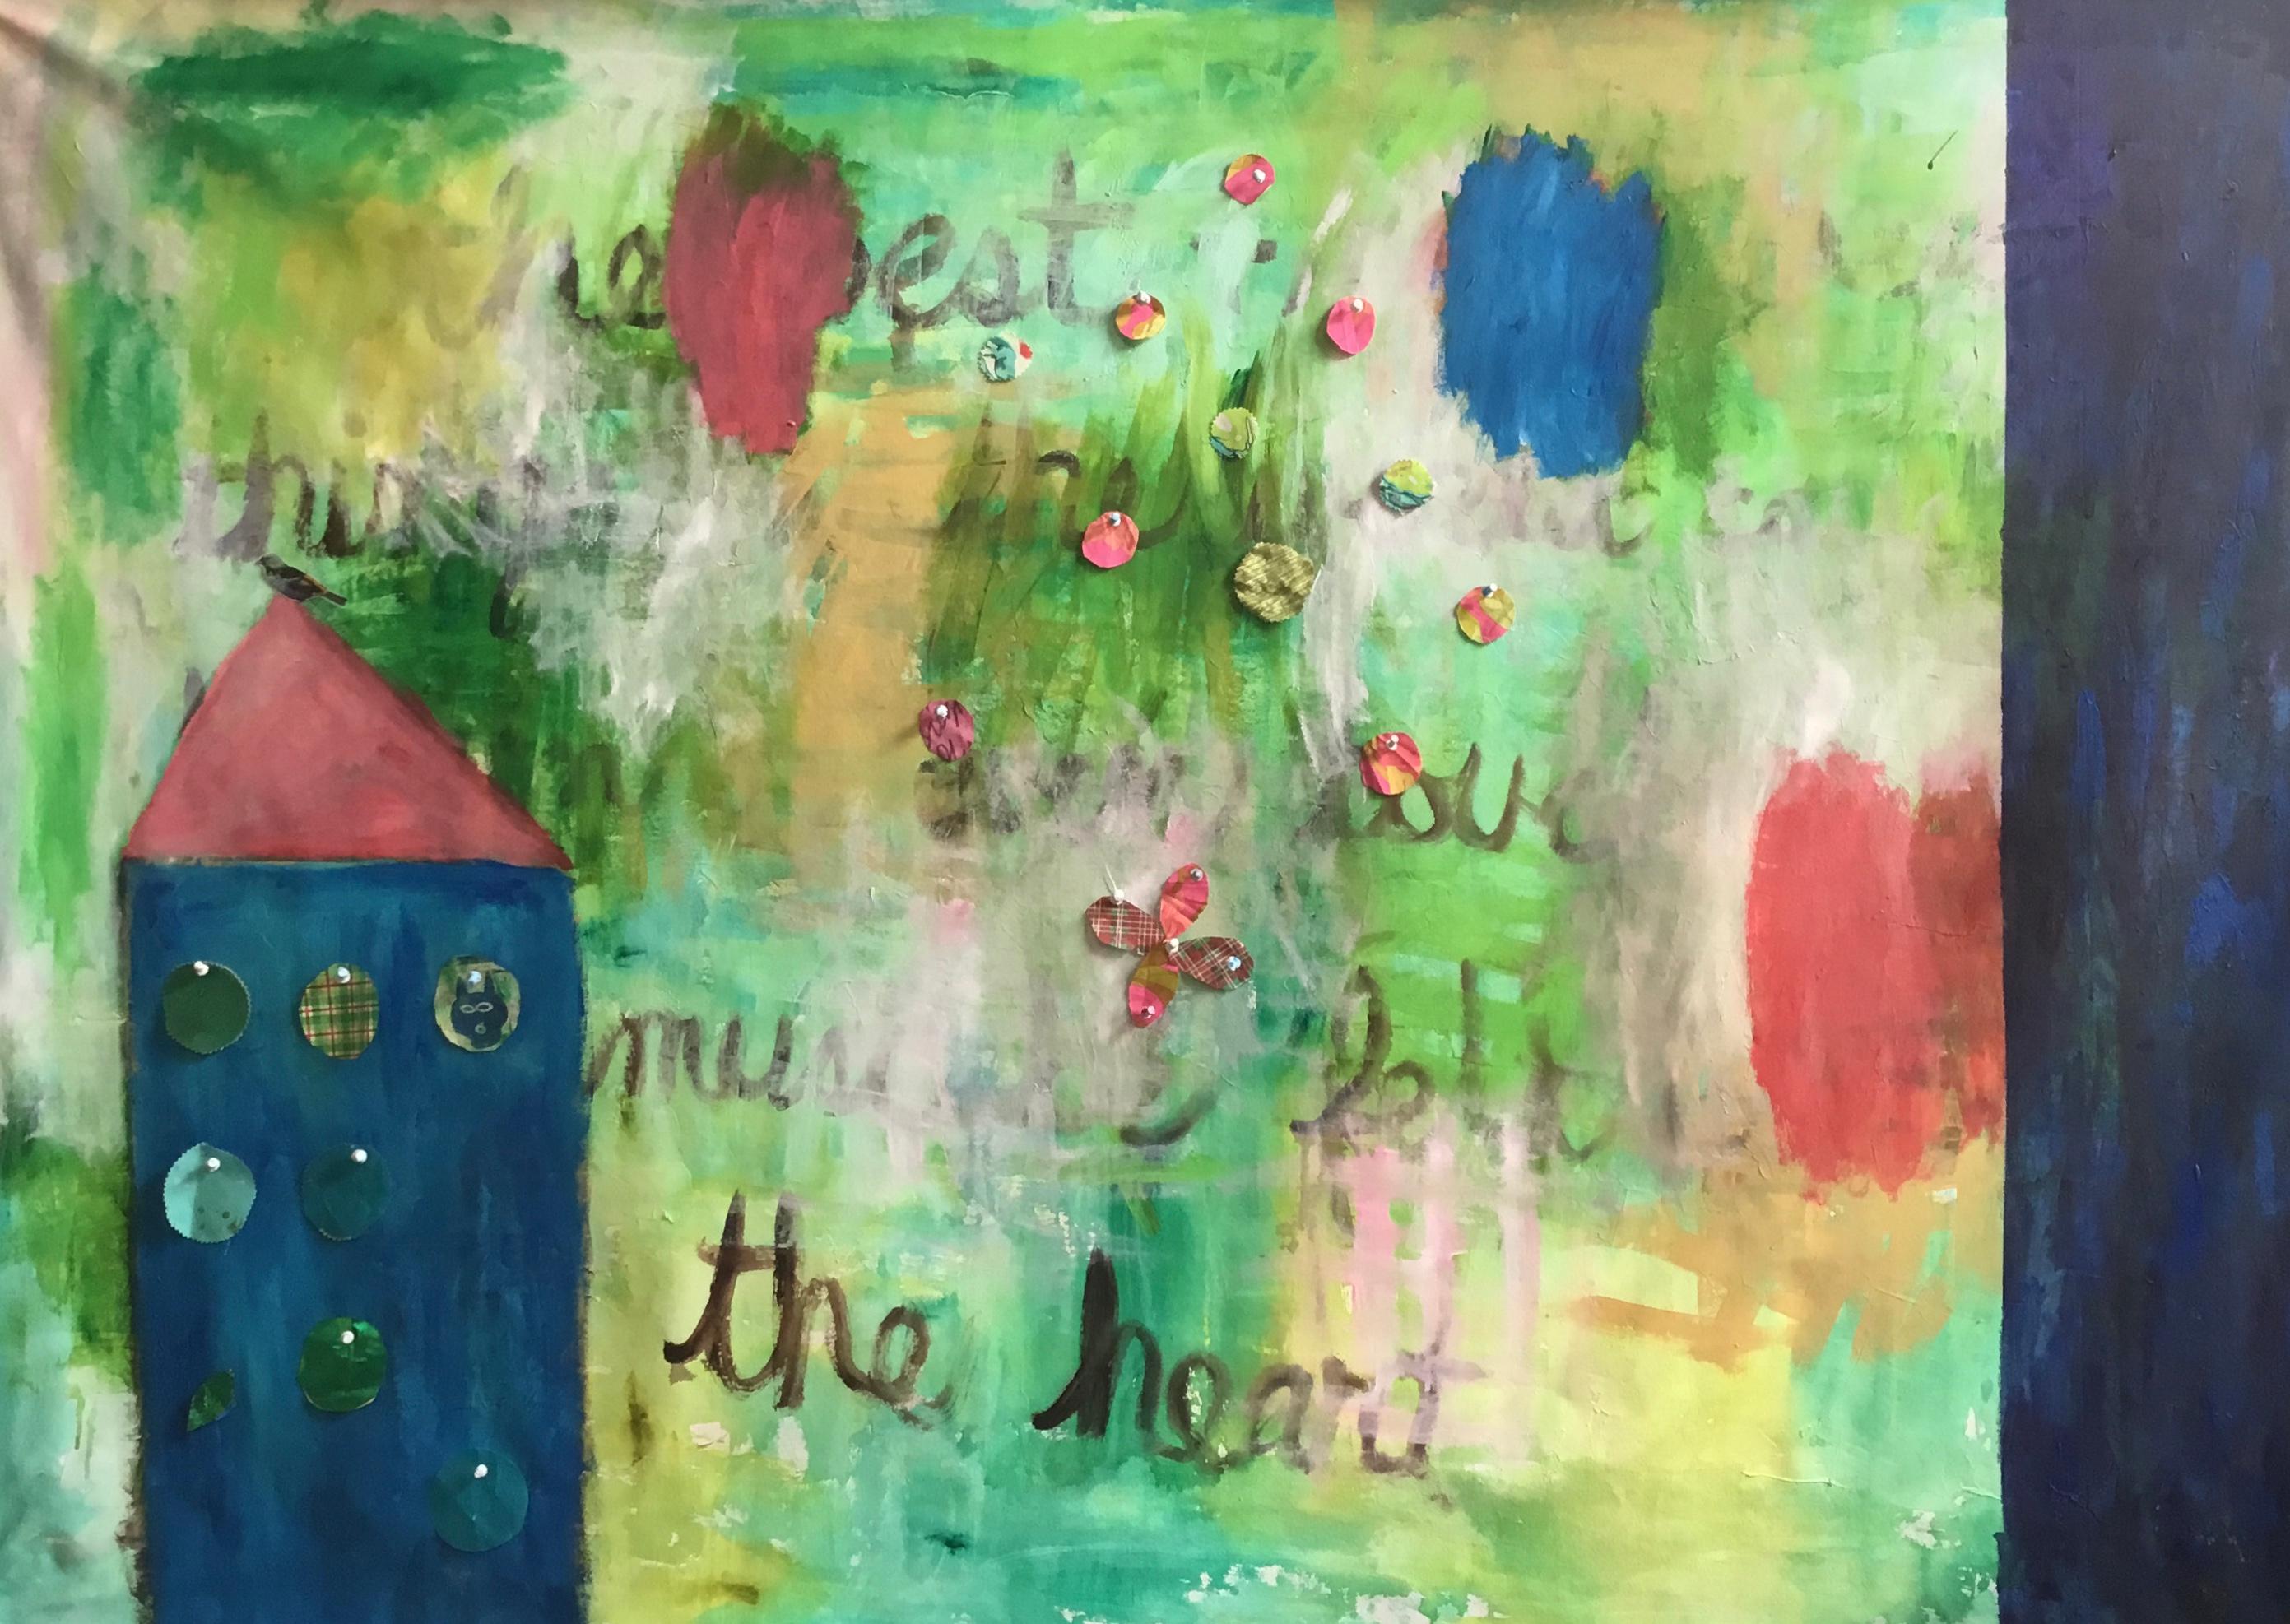 Heart and Home Large Mixed Media Contemporary Painting